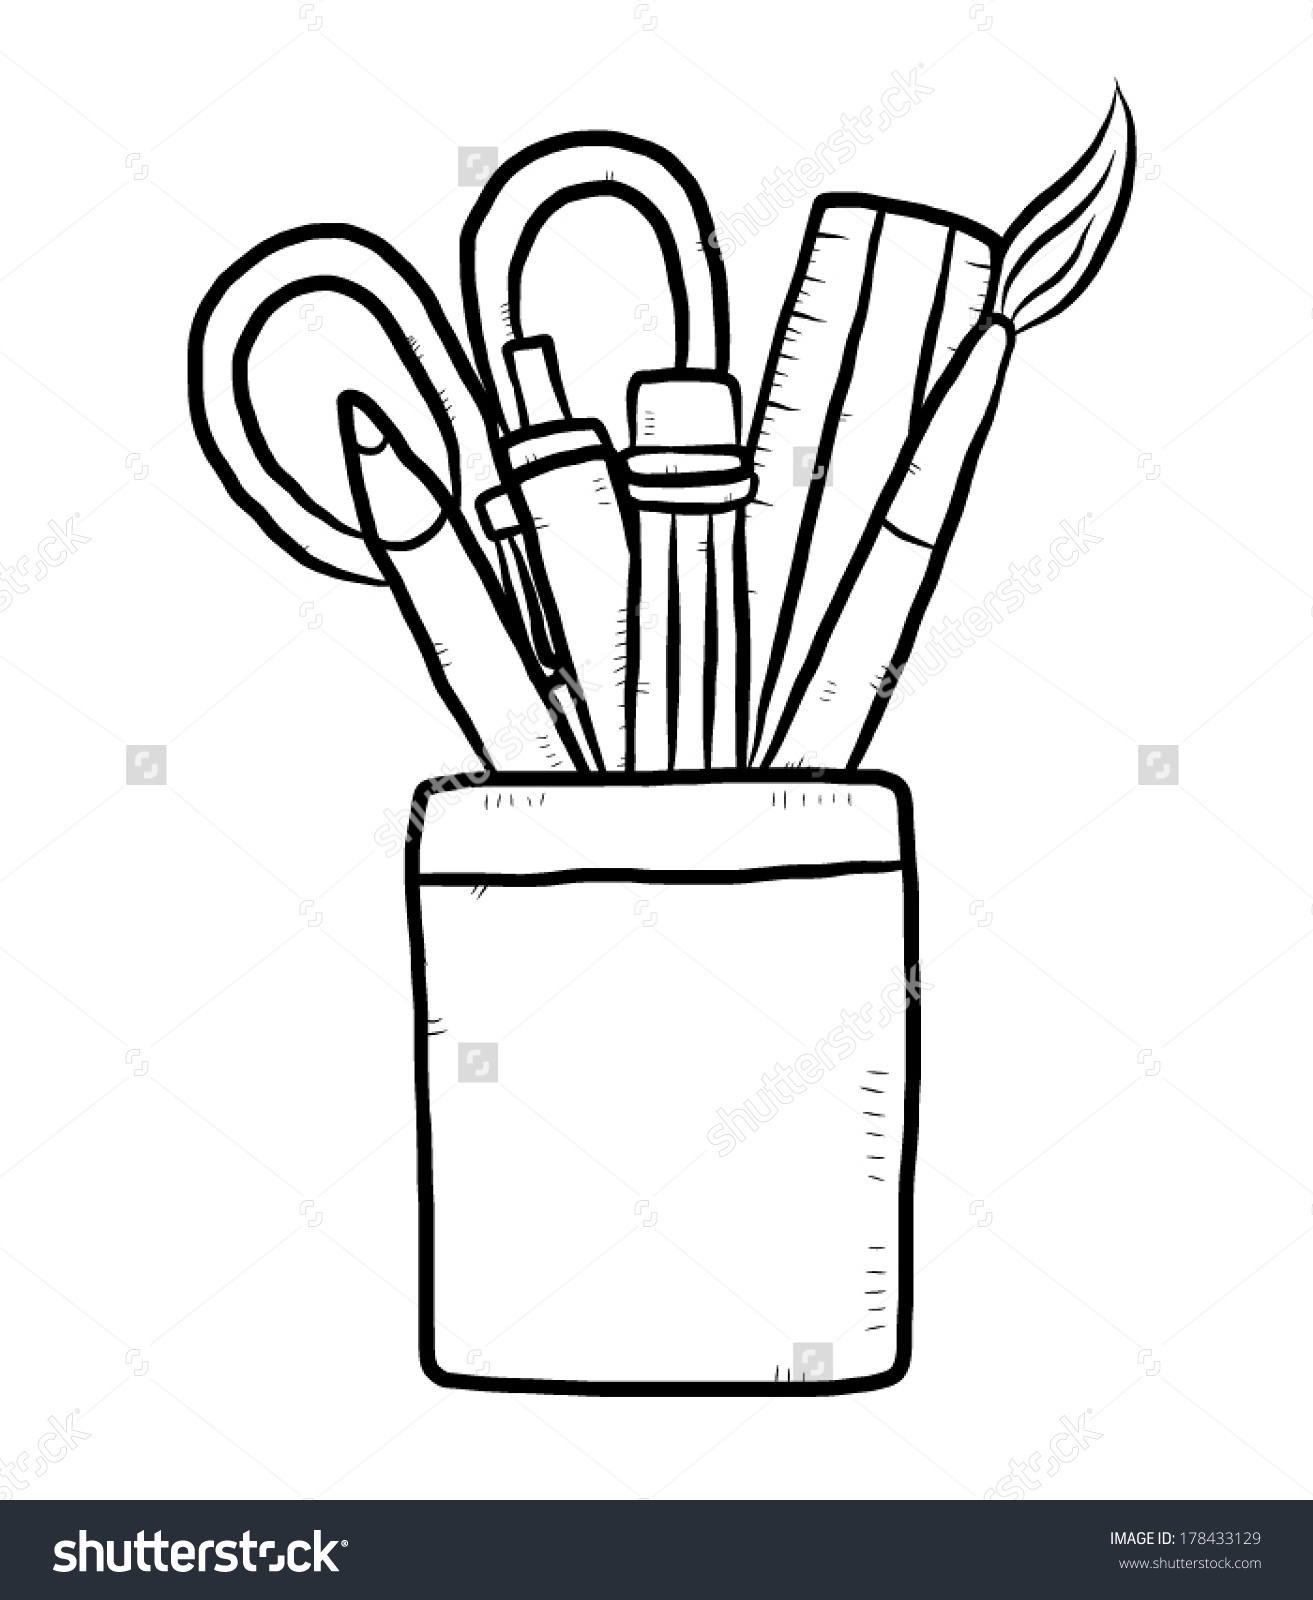 art clipart stationery